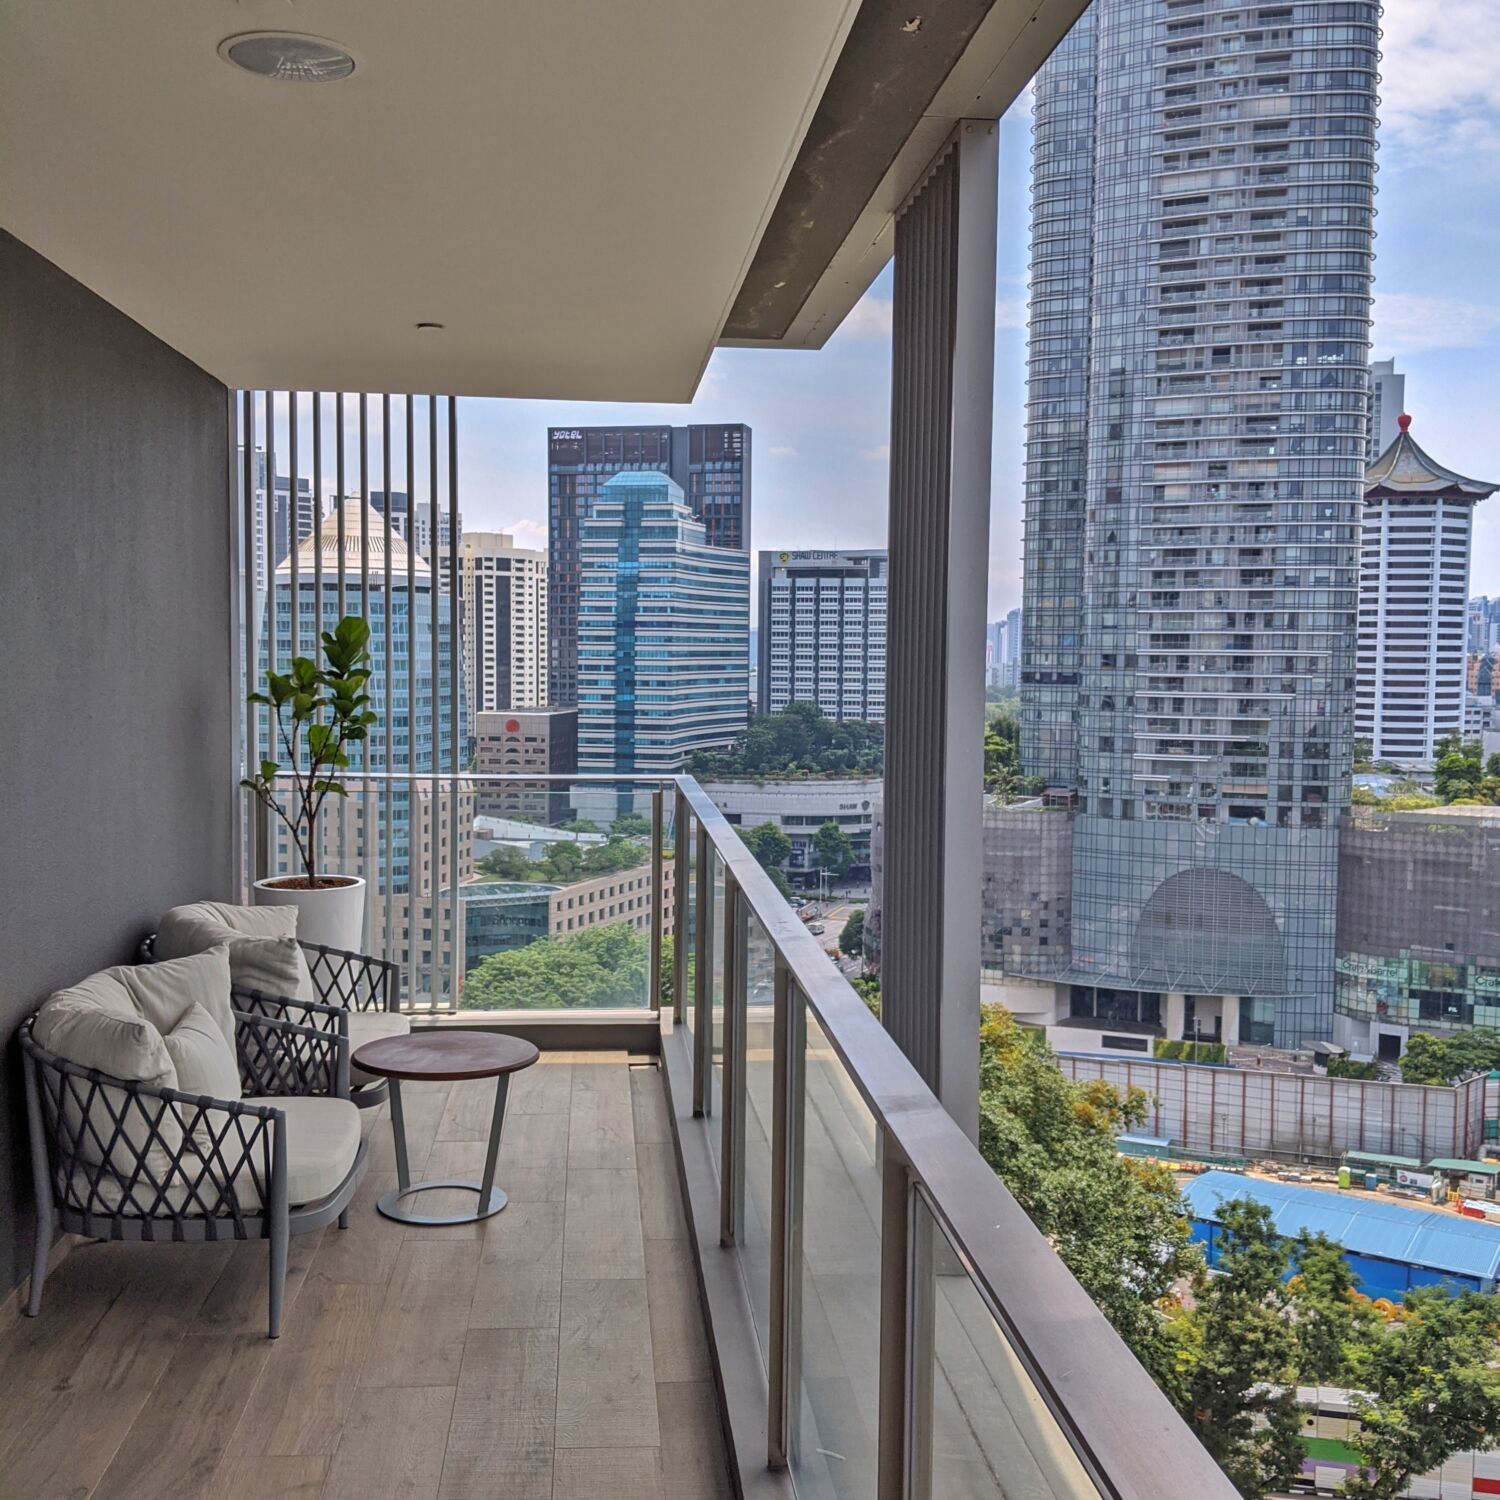 Anterior Mezquita Agacharse Serviced Apartment Review: Fraser Residence Orchard Singapore (One-Bedroom  Executive Terrace) – Luxurious Expat Residential Fantasy Off Orchard Road |  Secret Life of Fatbacks